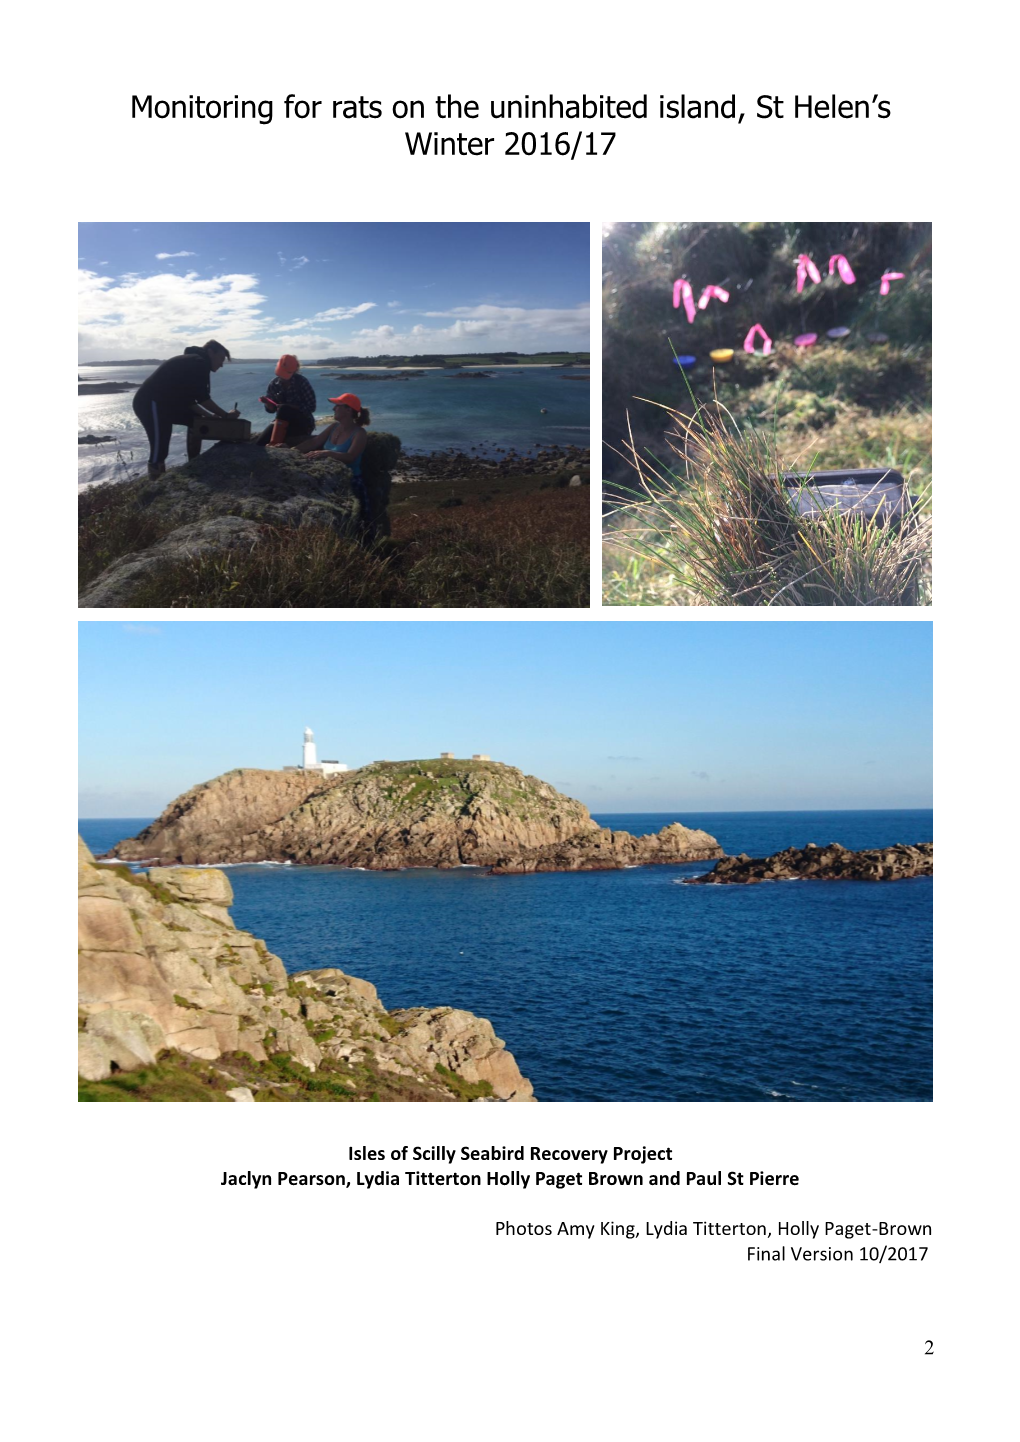 Monitoring for Rats on the Uninhabited Island, St Helen's Winter 2016/17